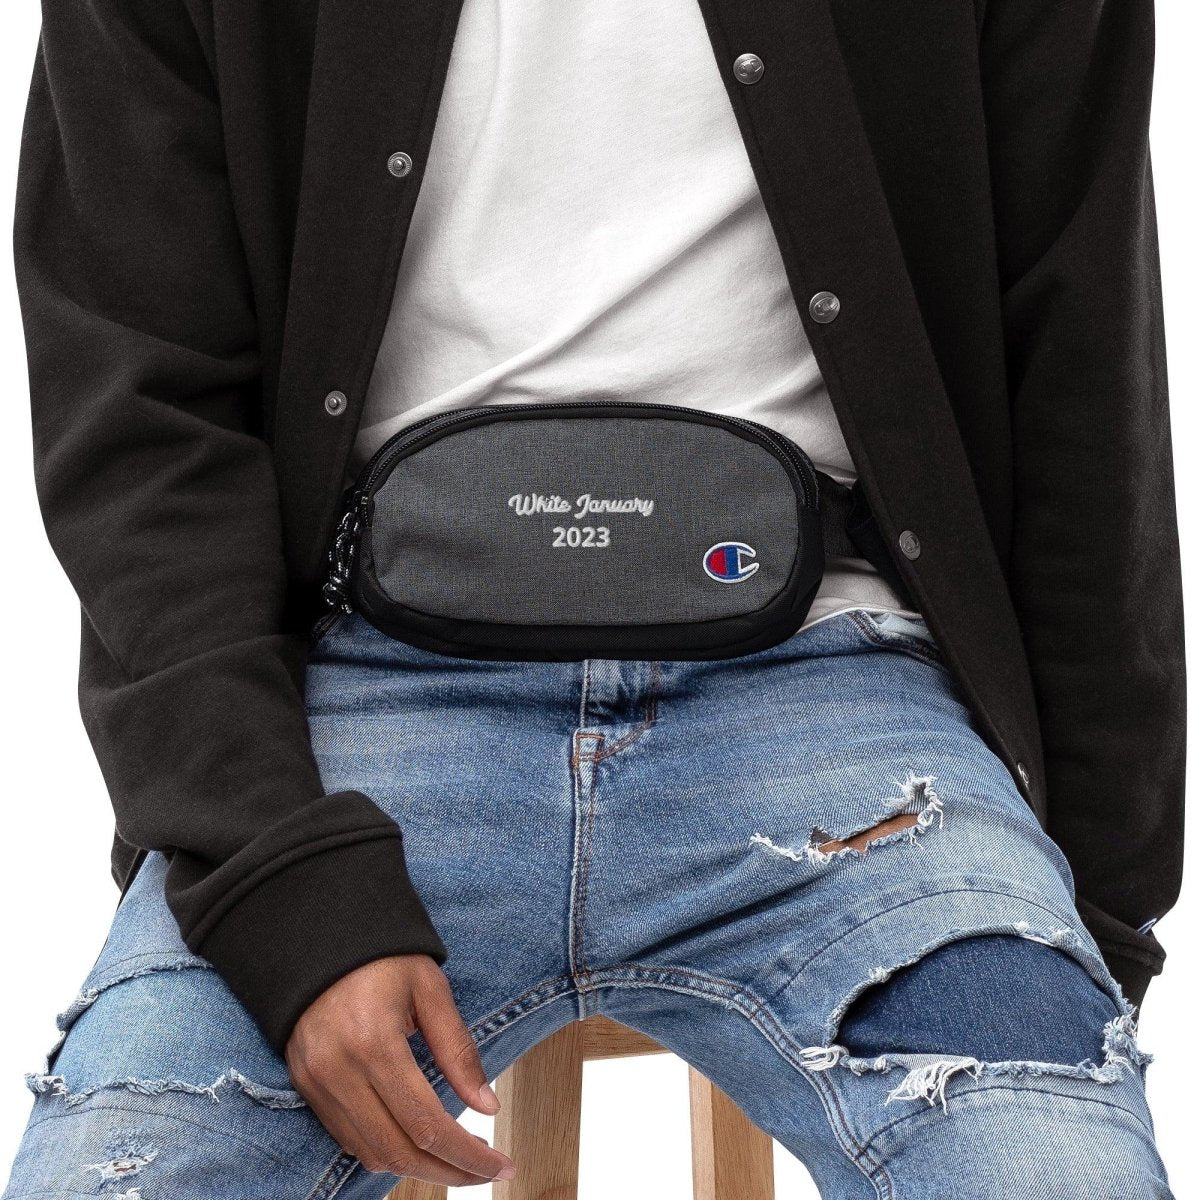 Champion fanny pack - Clean & Sober